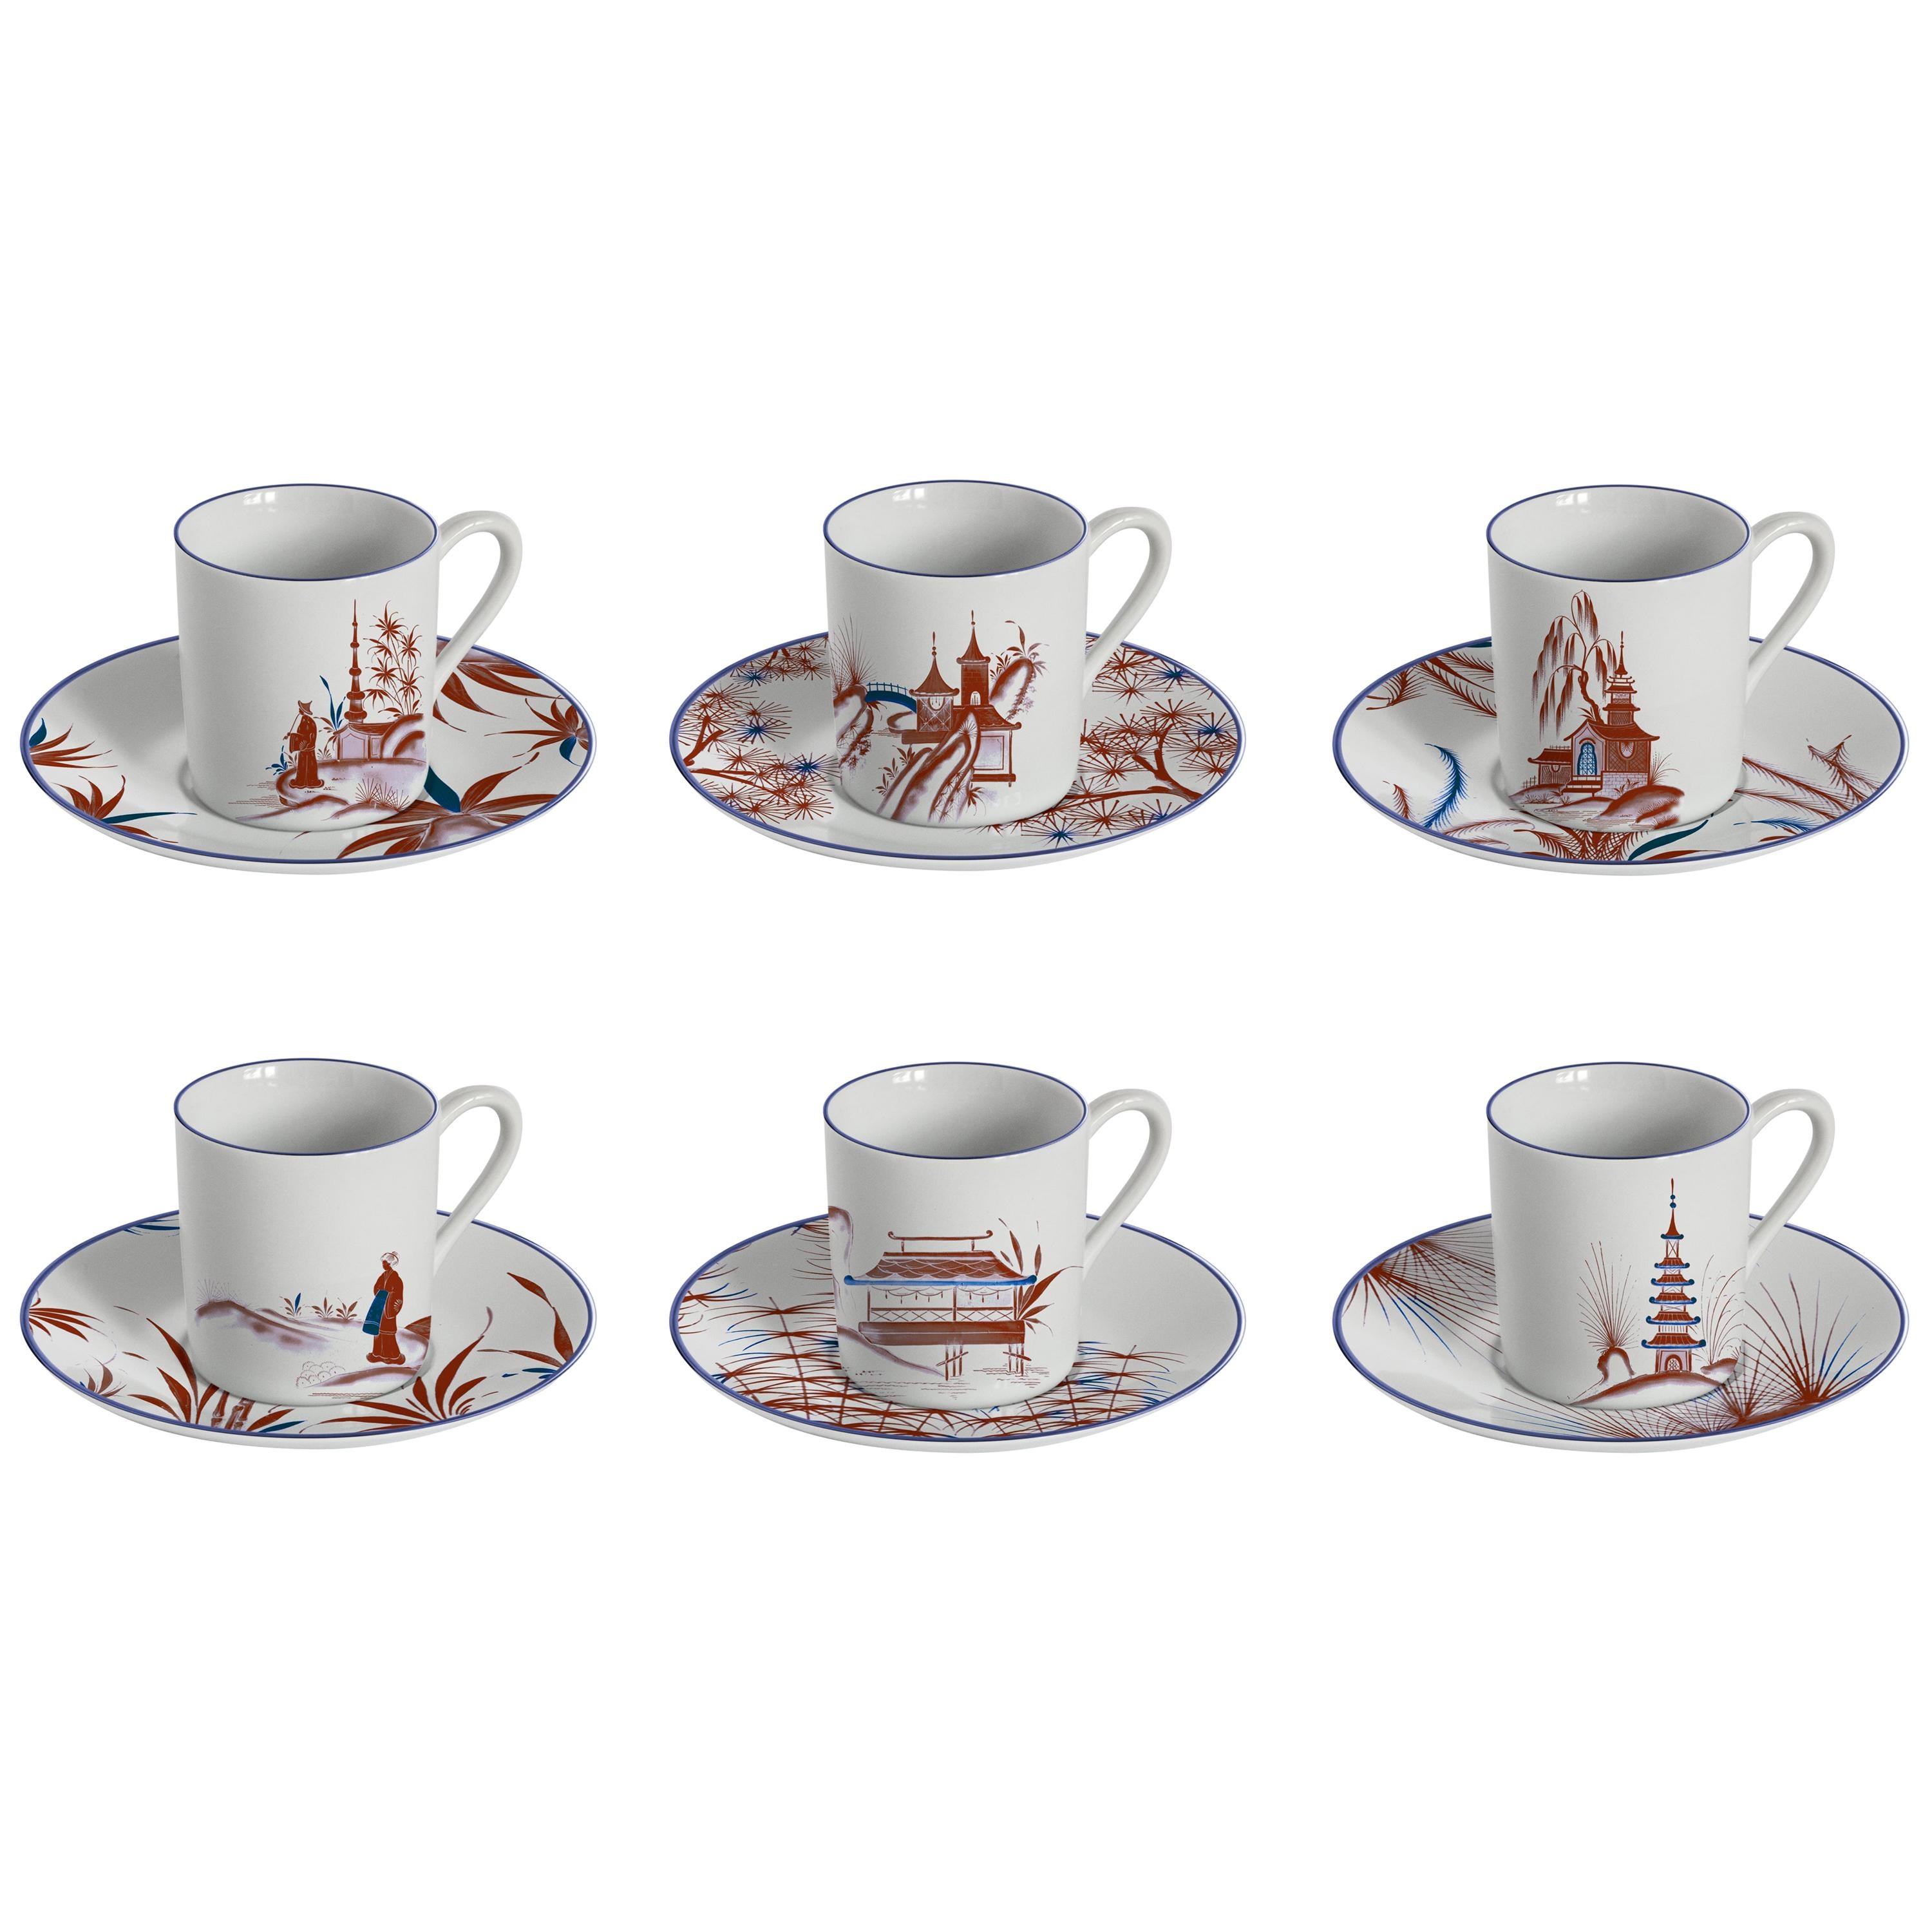 Natsumi, Coffee Set with Six Contemporary Porcelains with Decorative Design